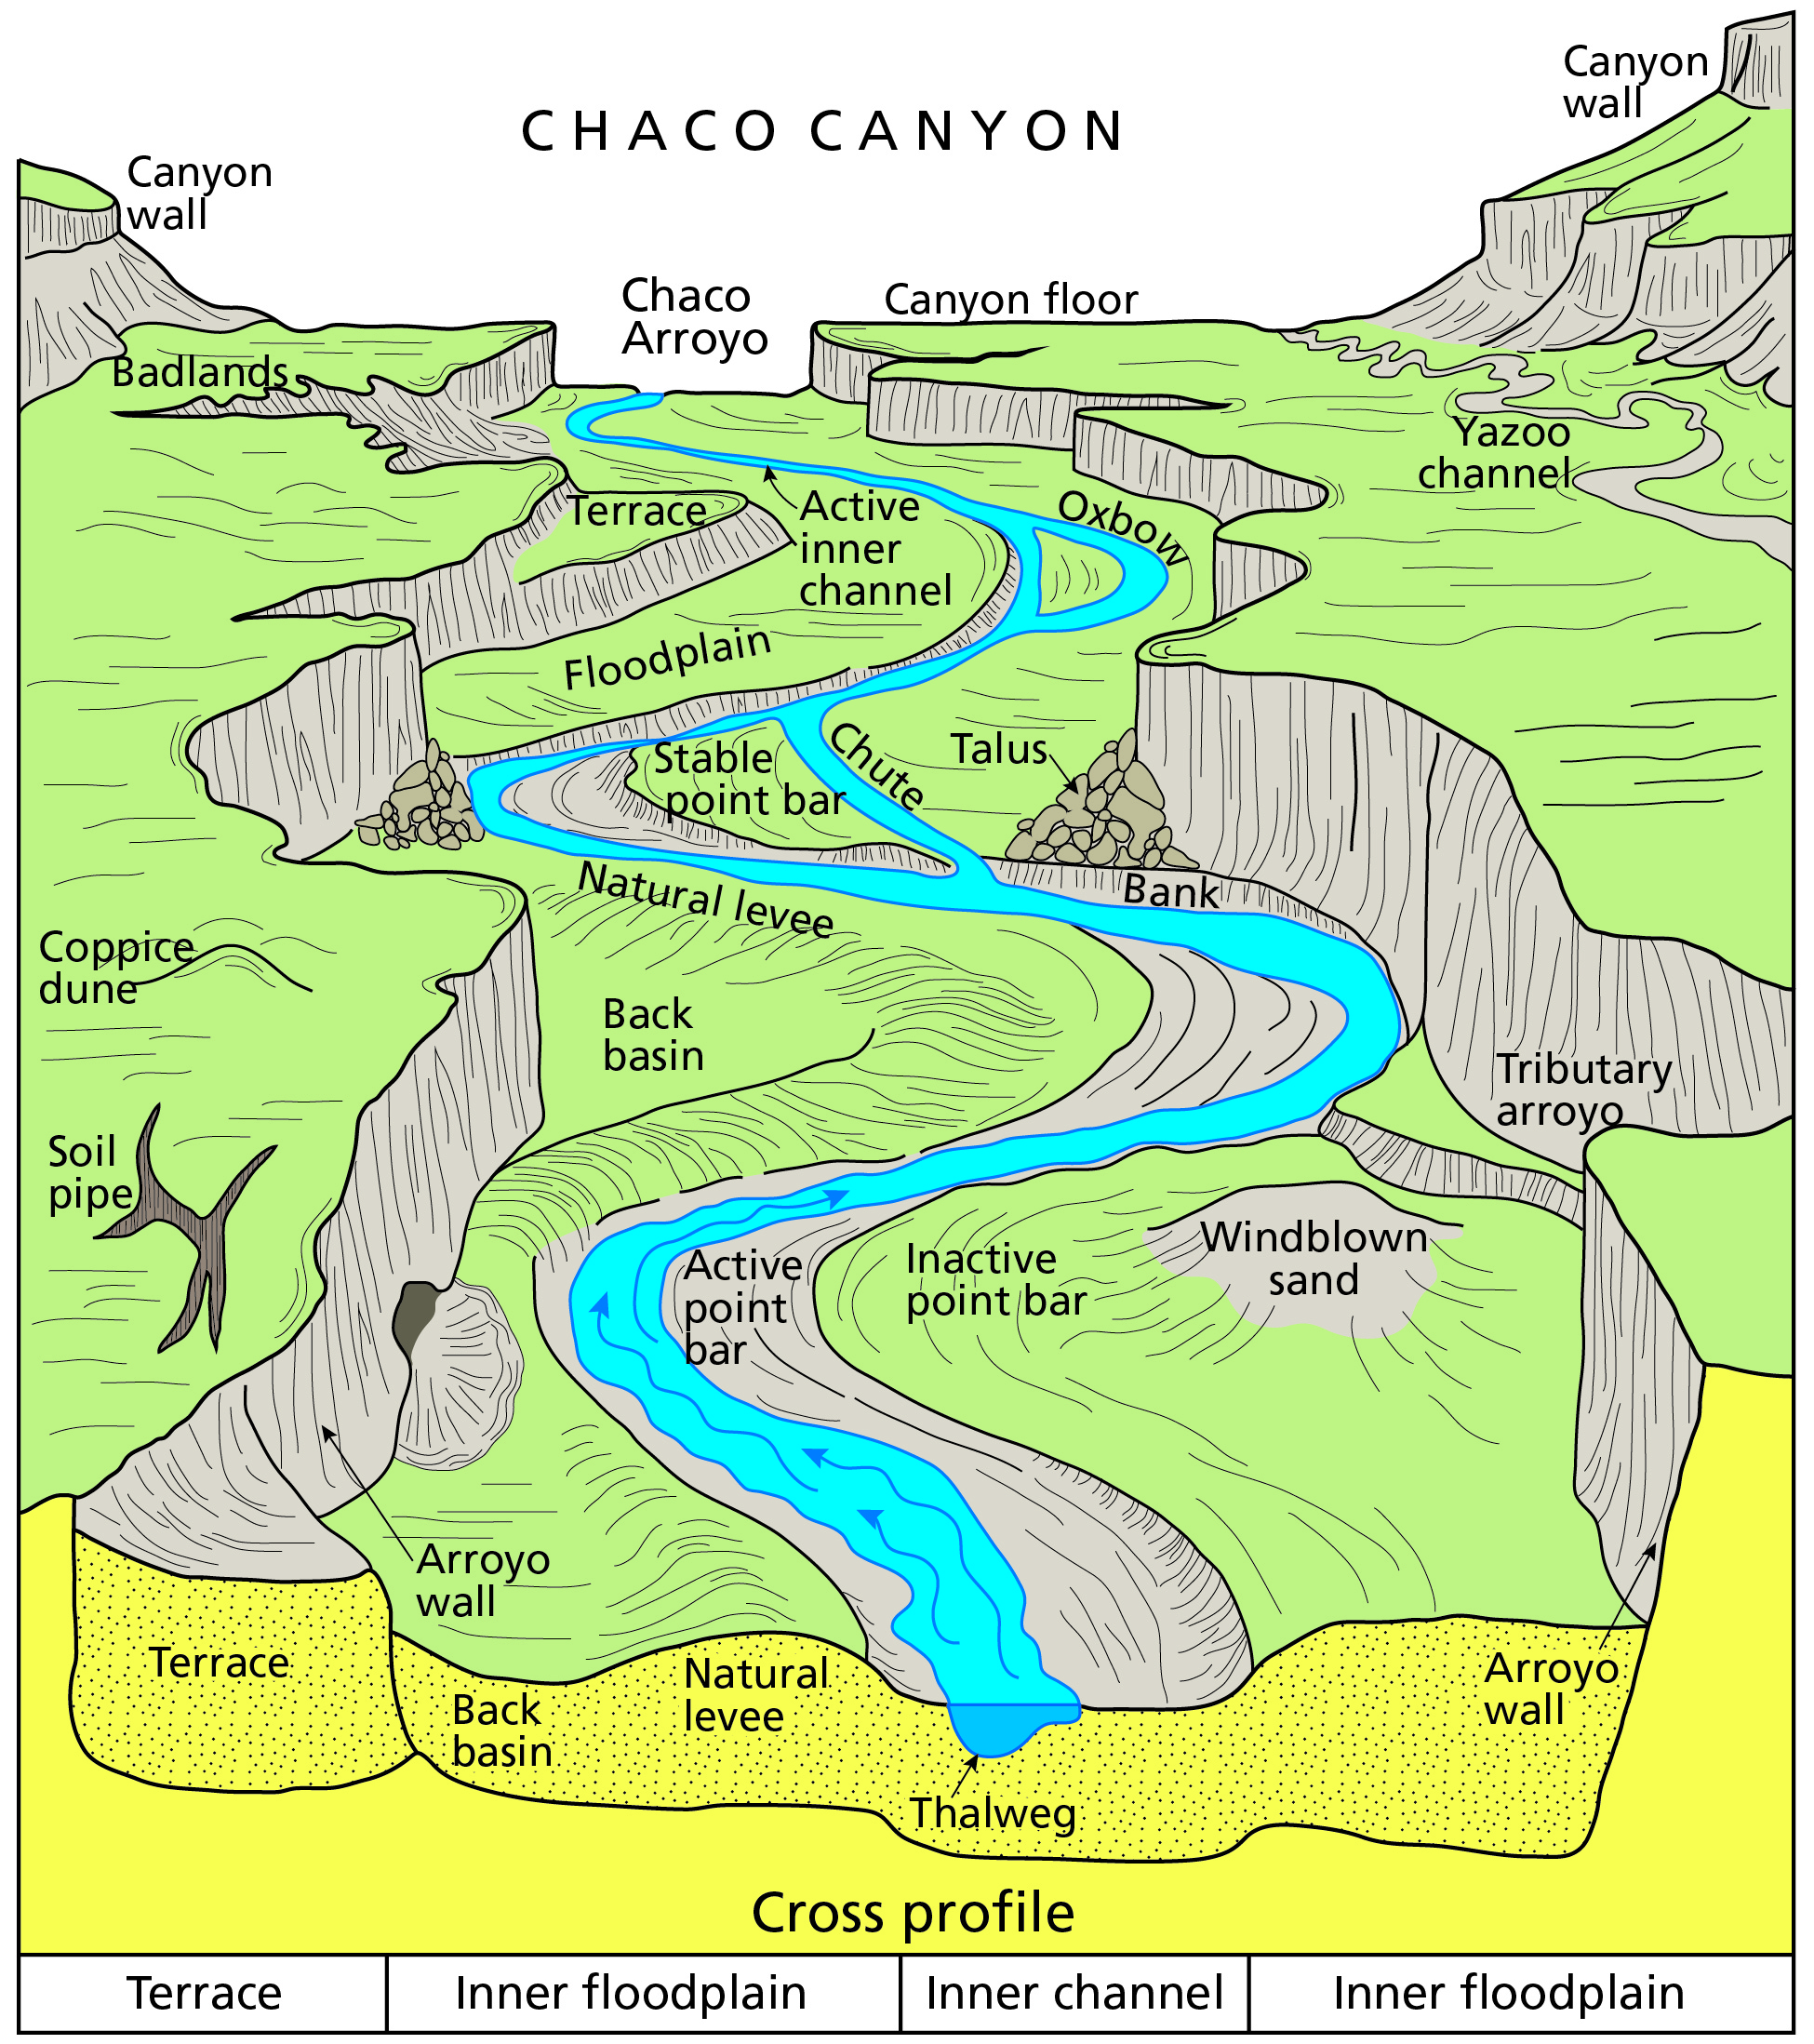 V-Shaped Valley - The Effects of Rivers on Land Formations